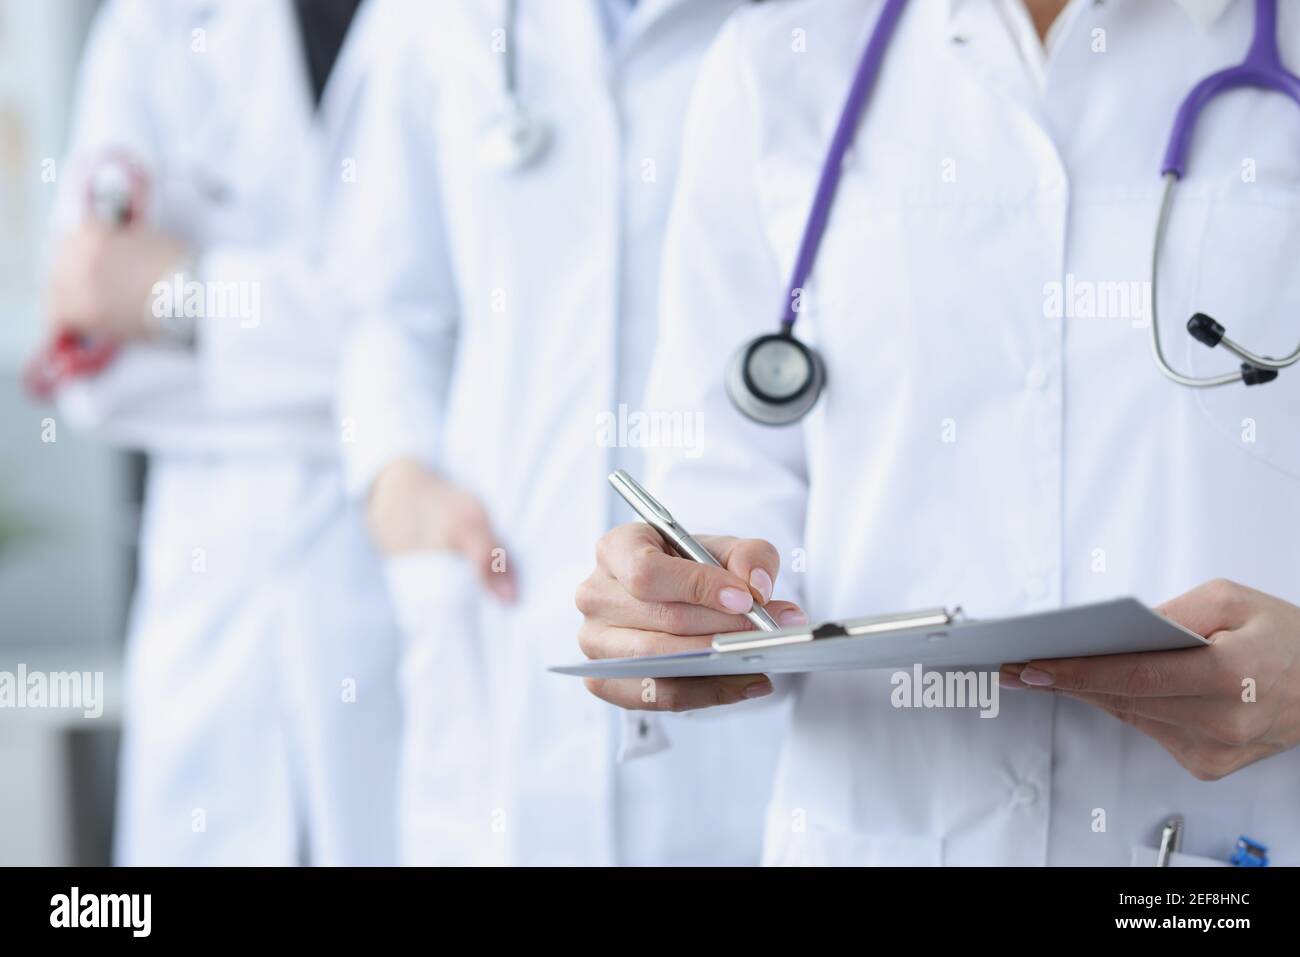 Doctors in white medical coats stand together Stock Photo